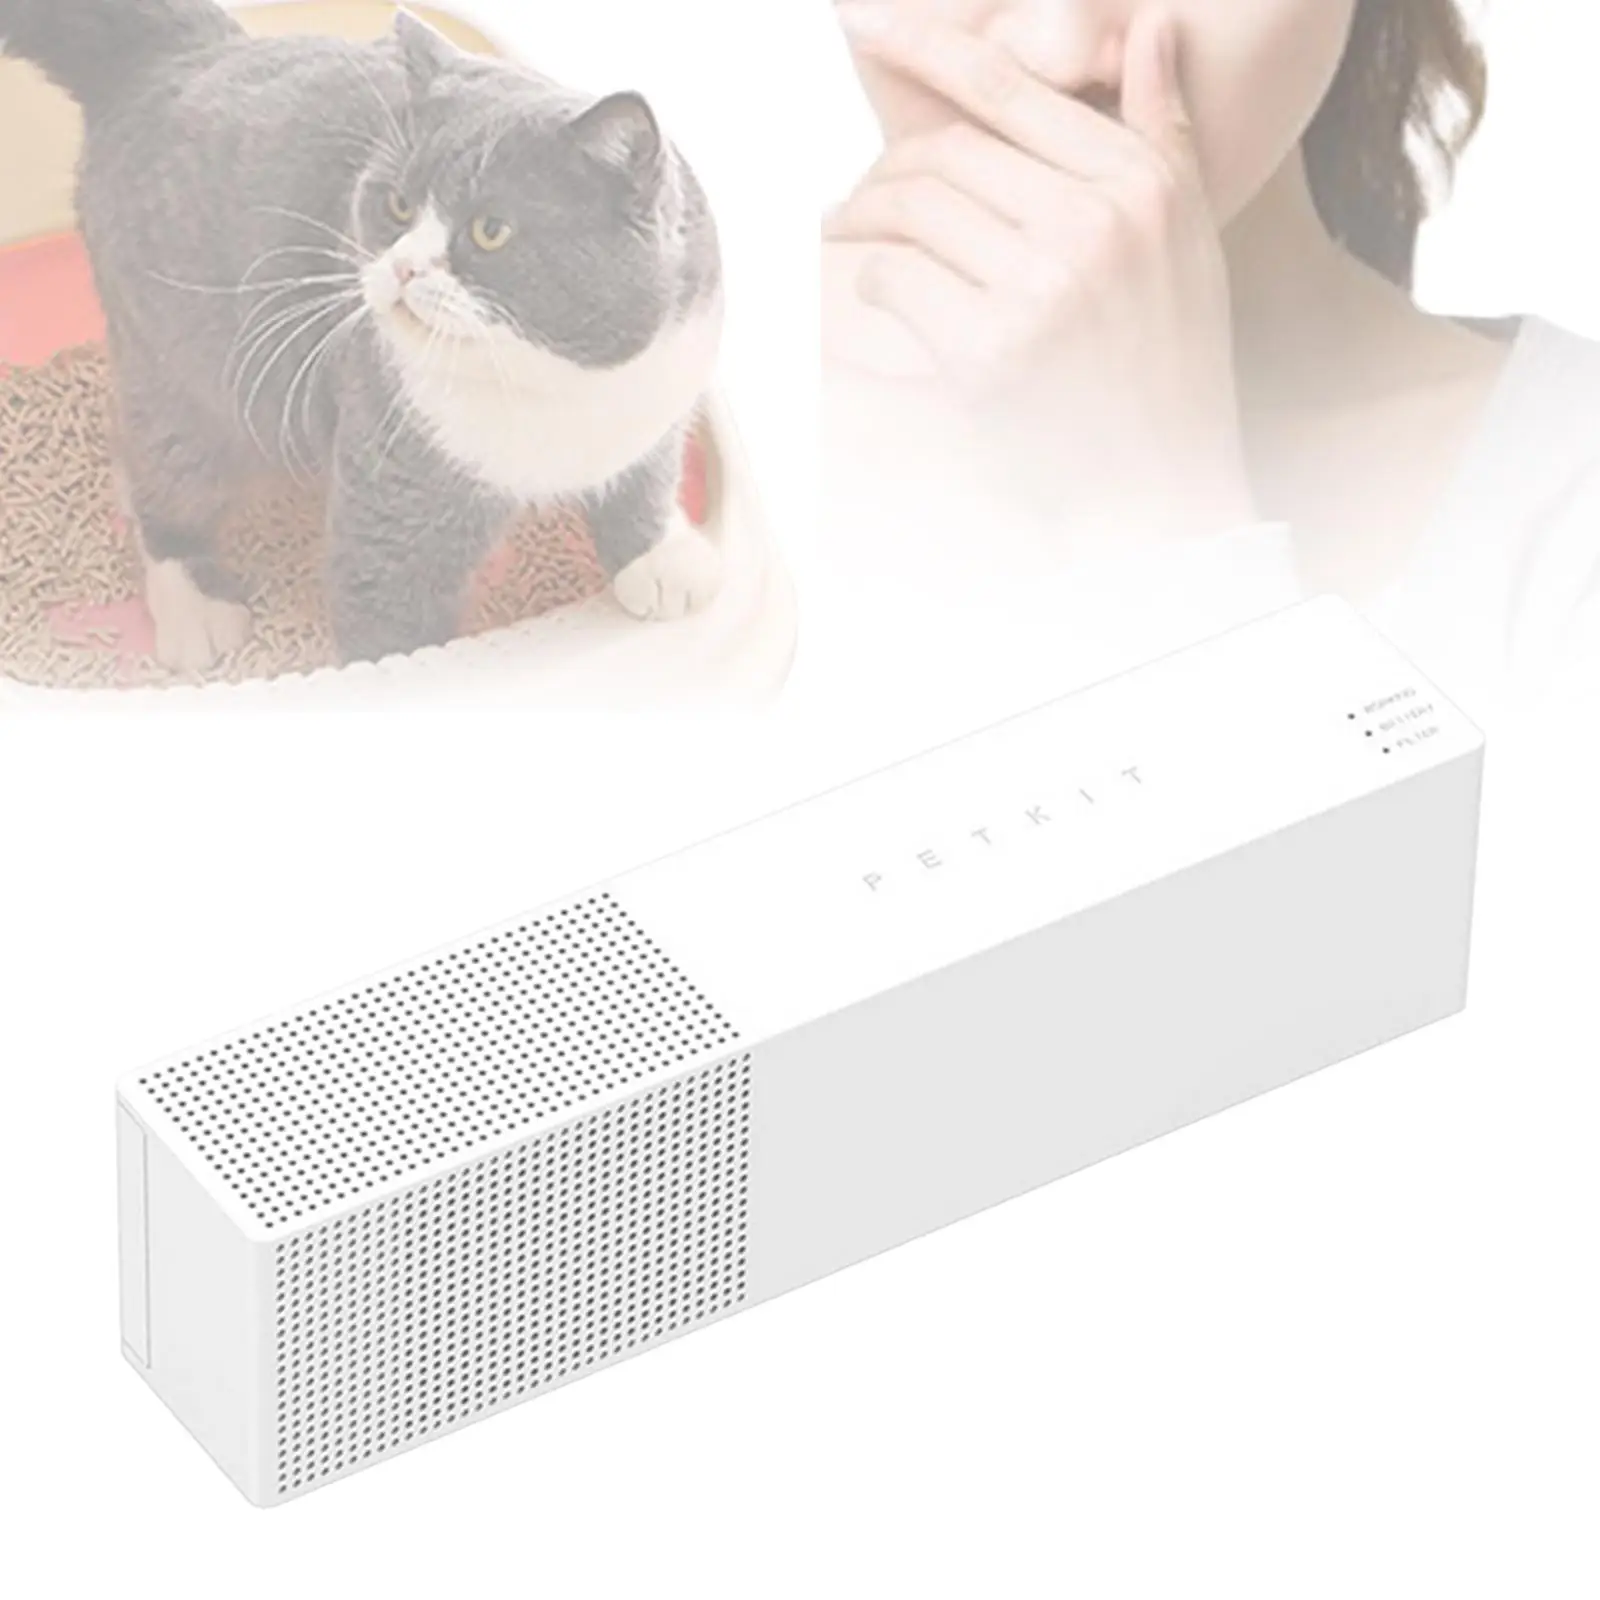 Air Purifier Easy to Use Smart Dog Toilet Odor Remover Wall Mounted Low Noise Cat Litter Odor Remover for Home Kitchen